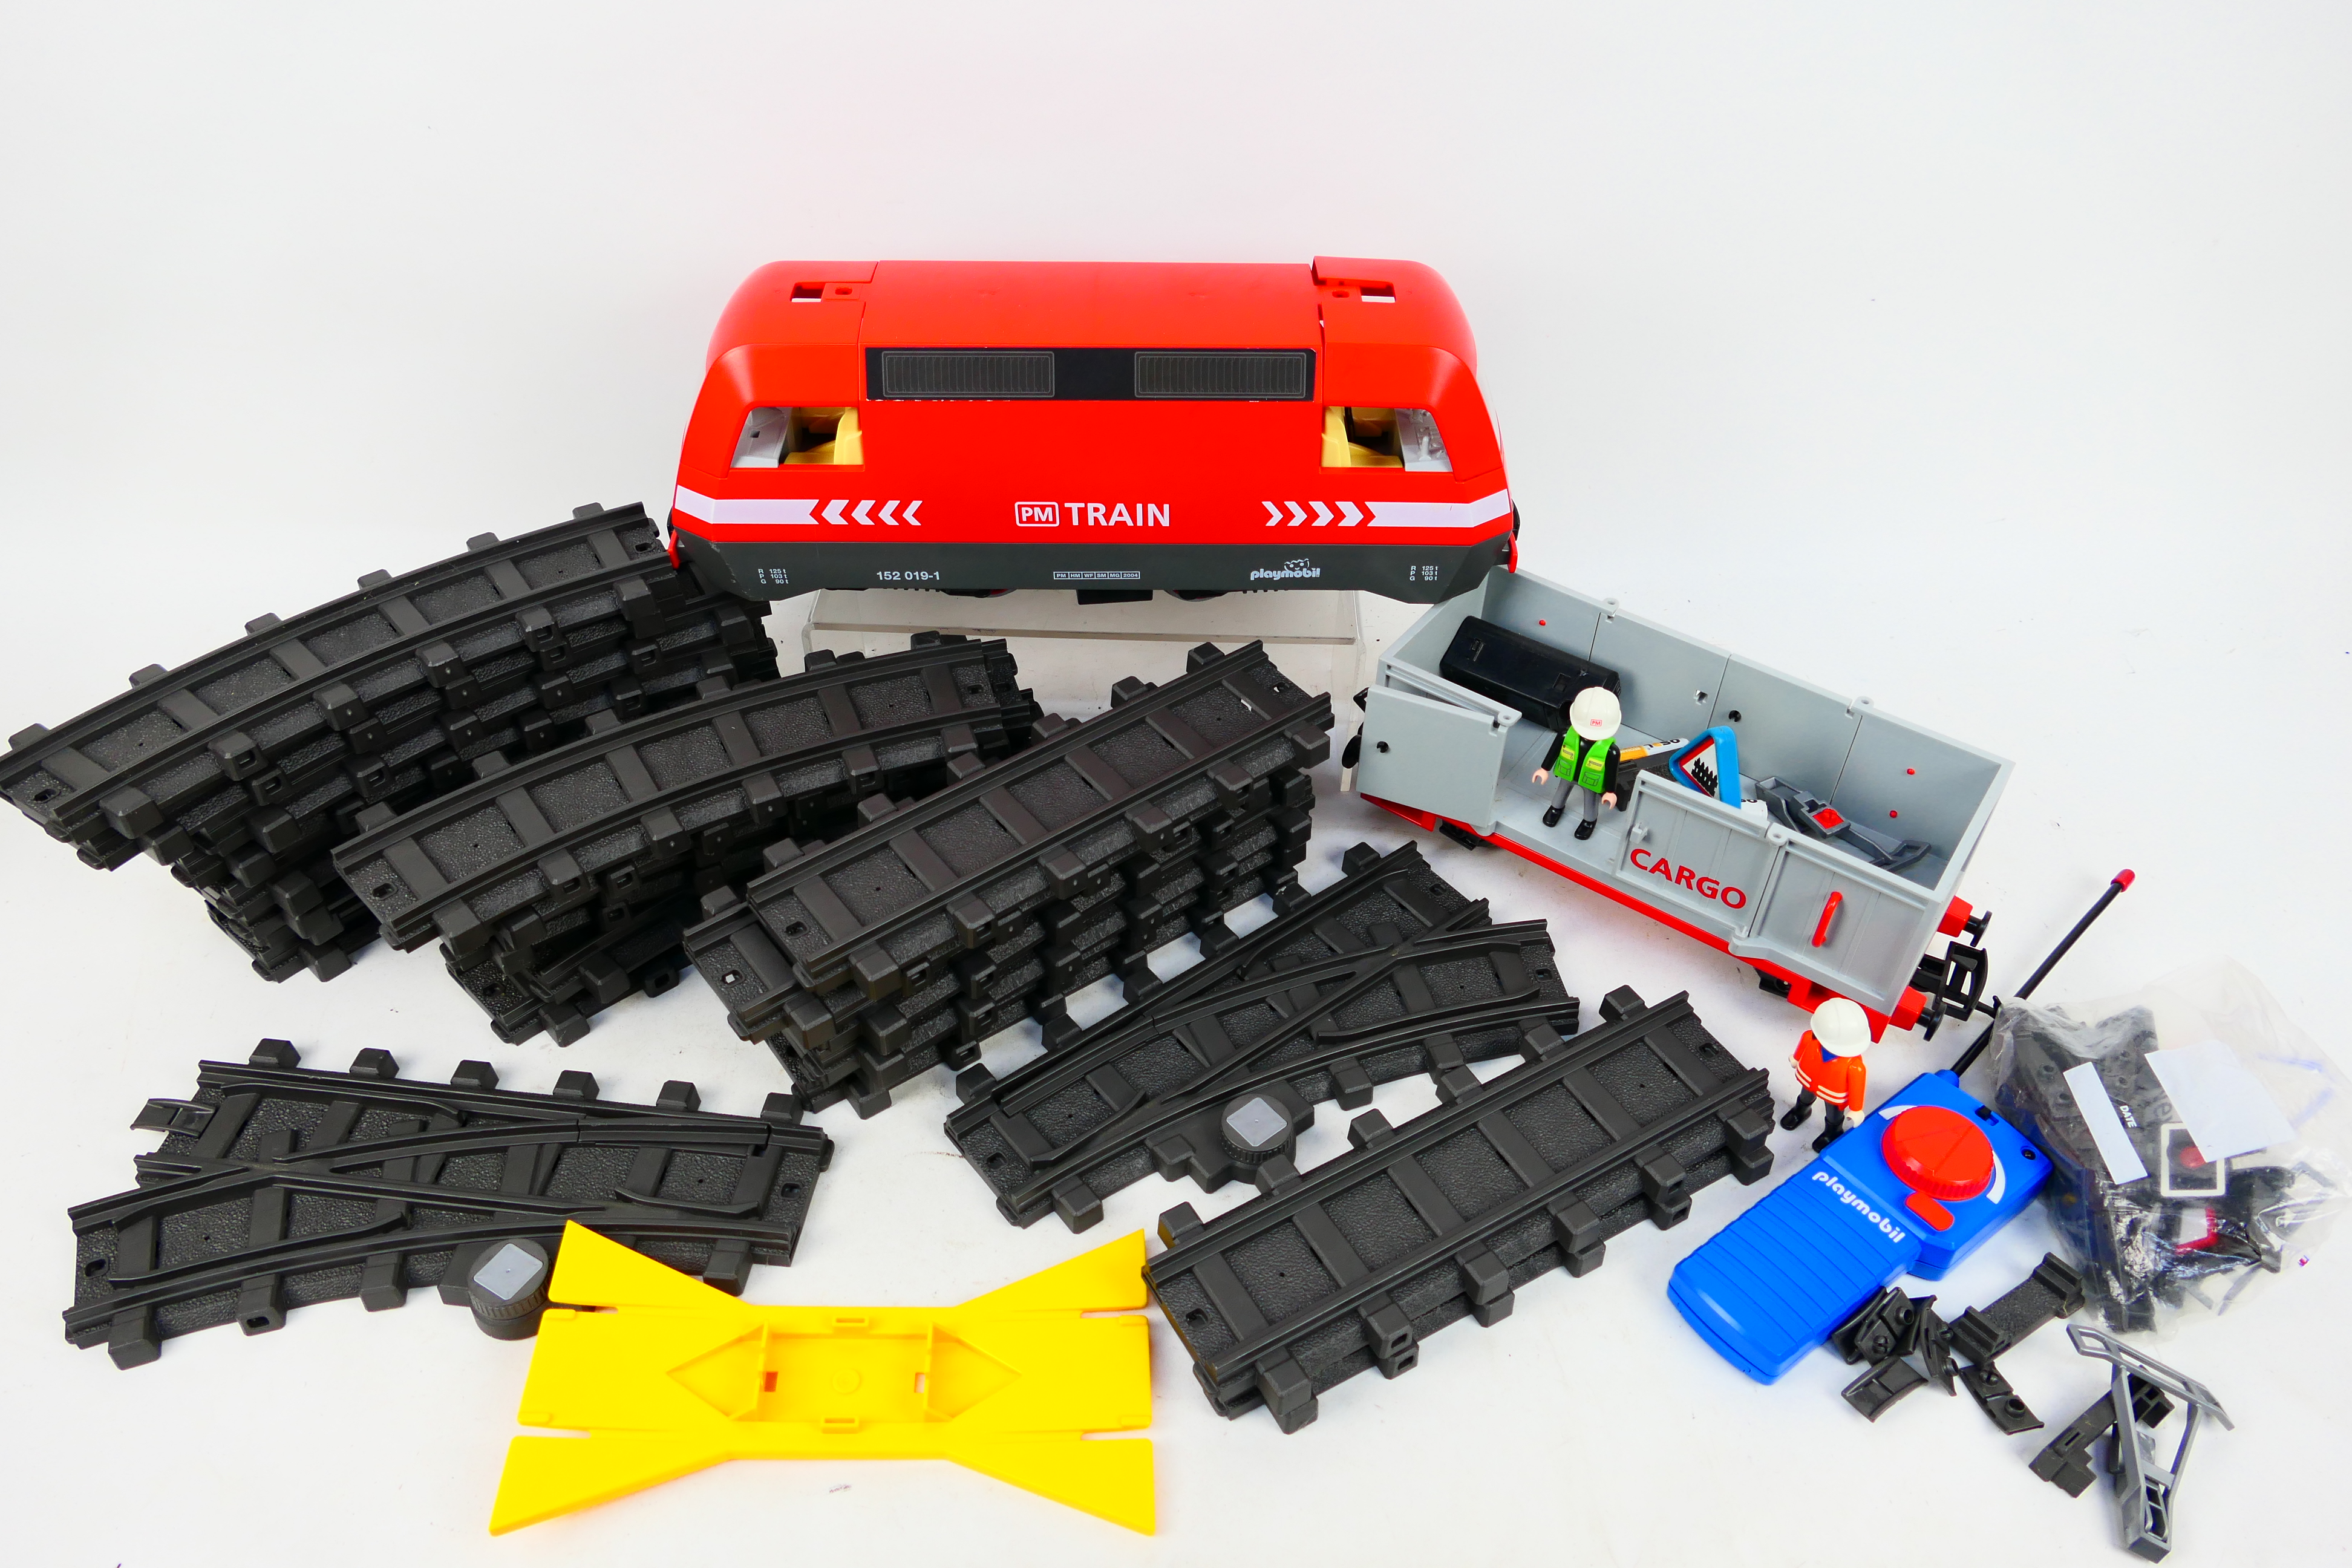 Playmobil - An unboxed Plymobil #4010 remote control Cargo Train Set.